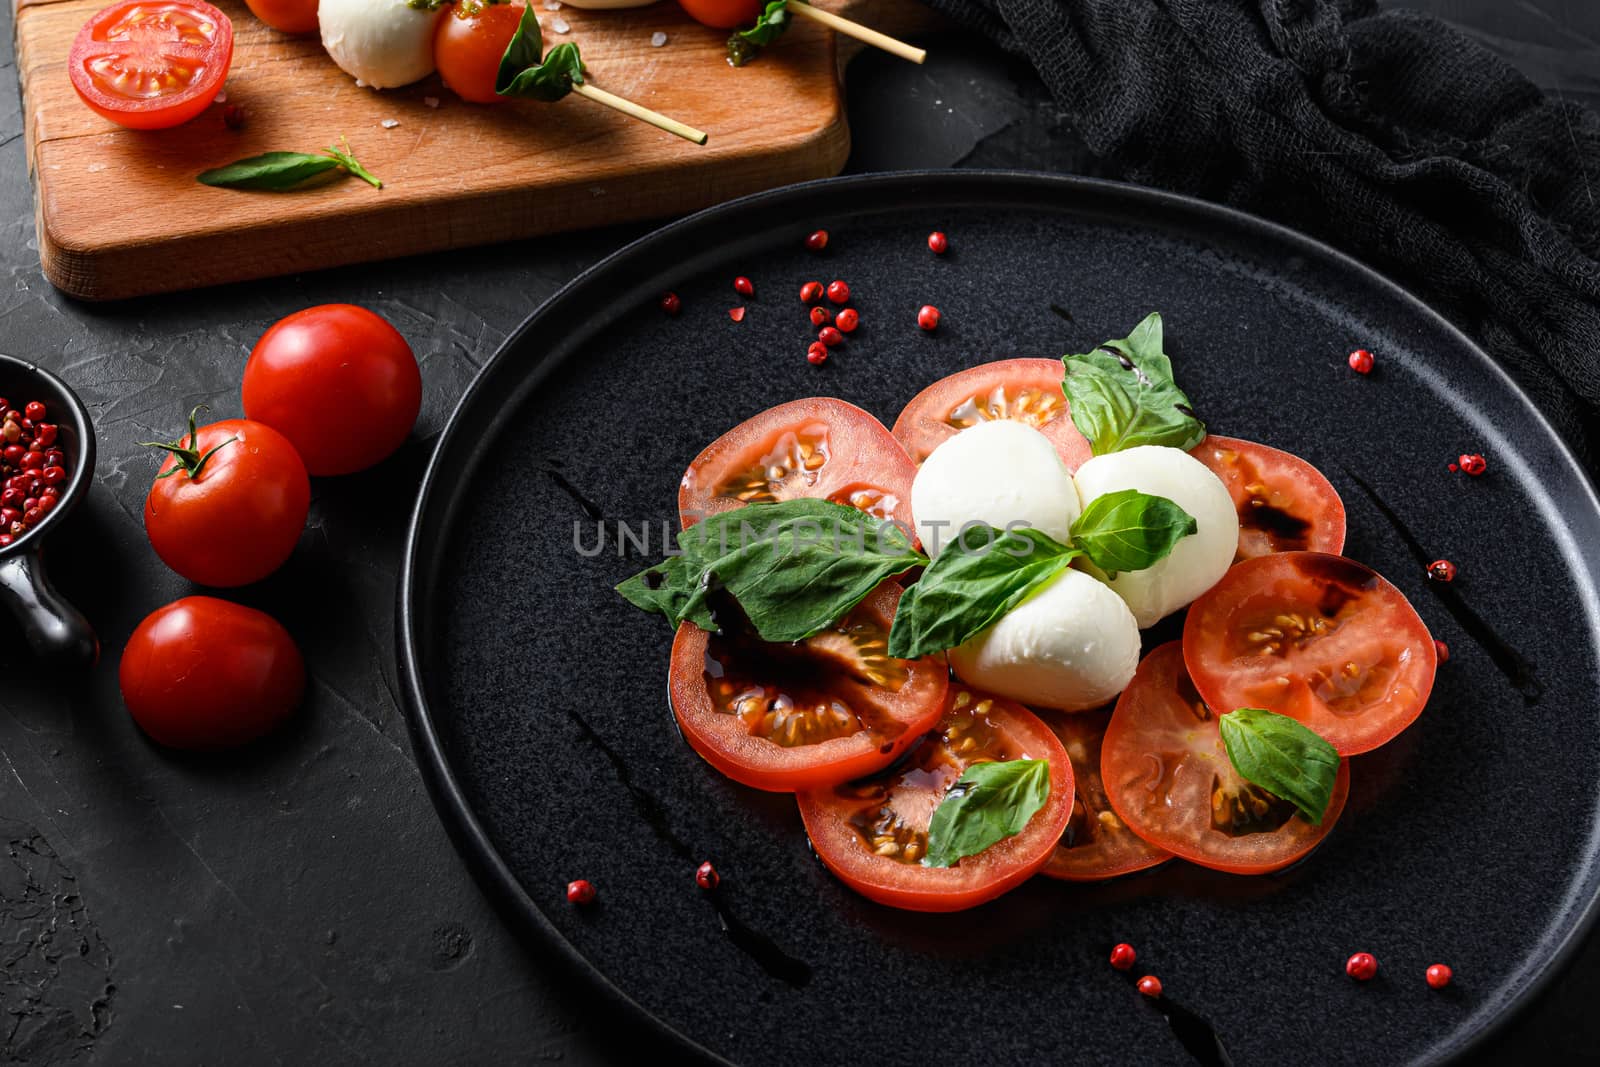 Caprese salad Tomato and mozzarella slices with basil leaves on sticks skewer and on black ceramic platwantipasta black textured background selective focus.